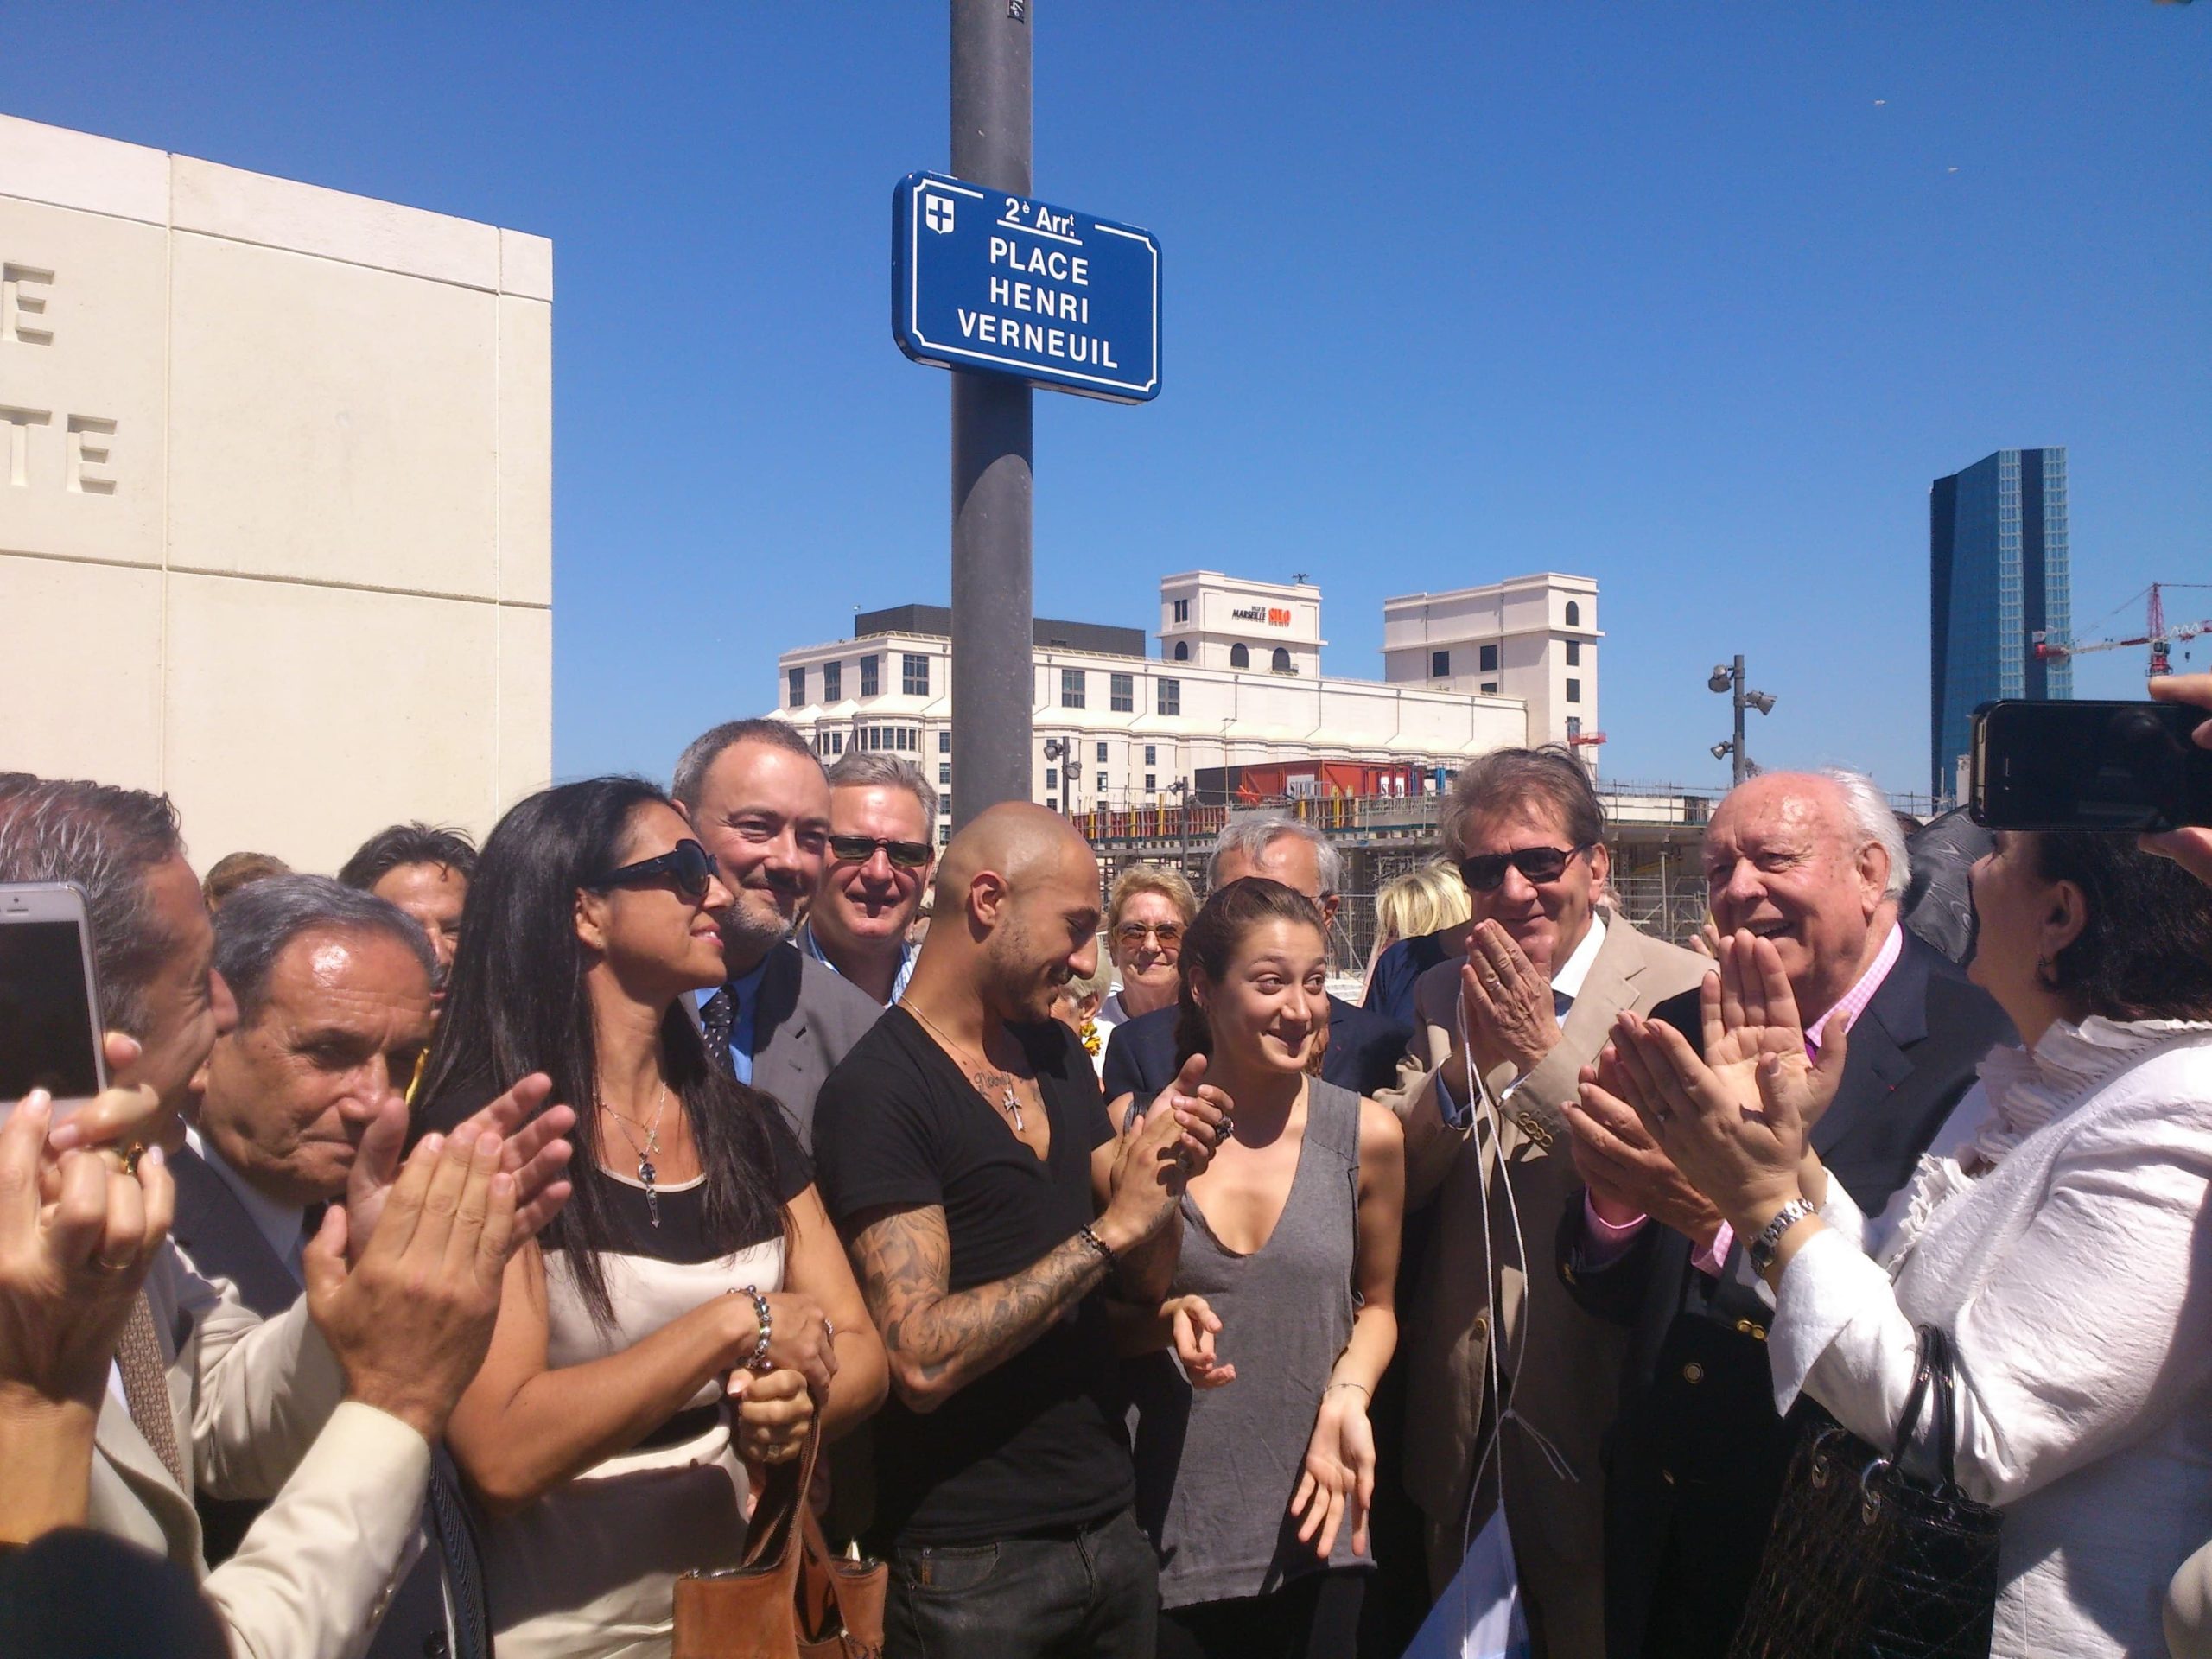 Inauguration of Place Henri Verneuil